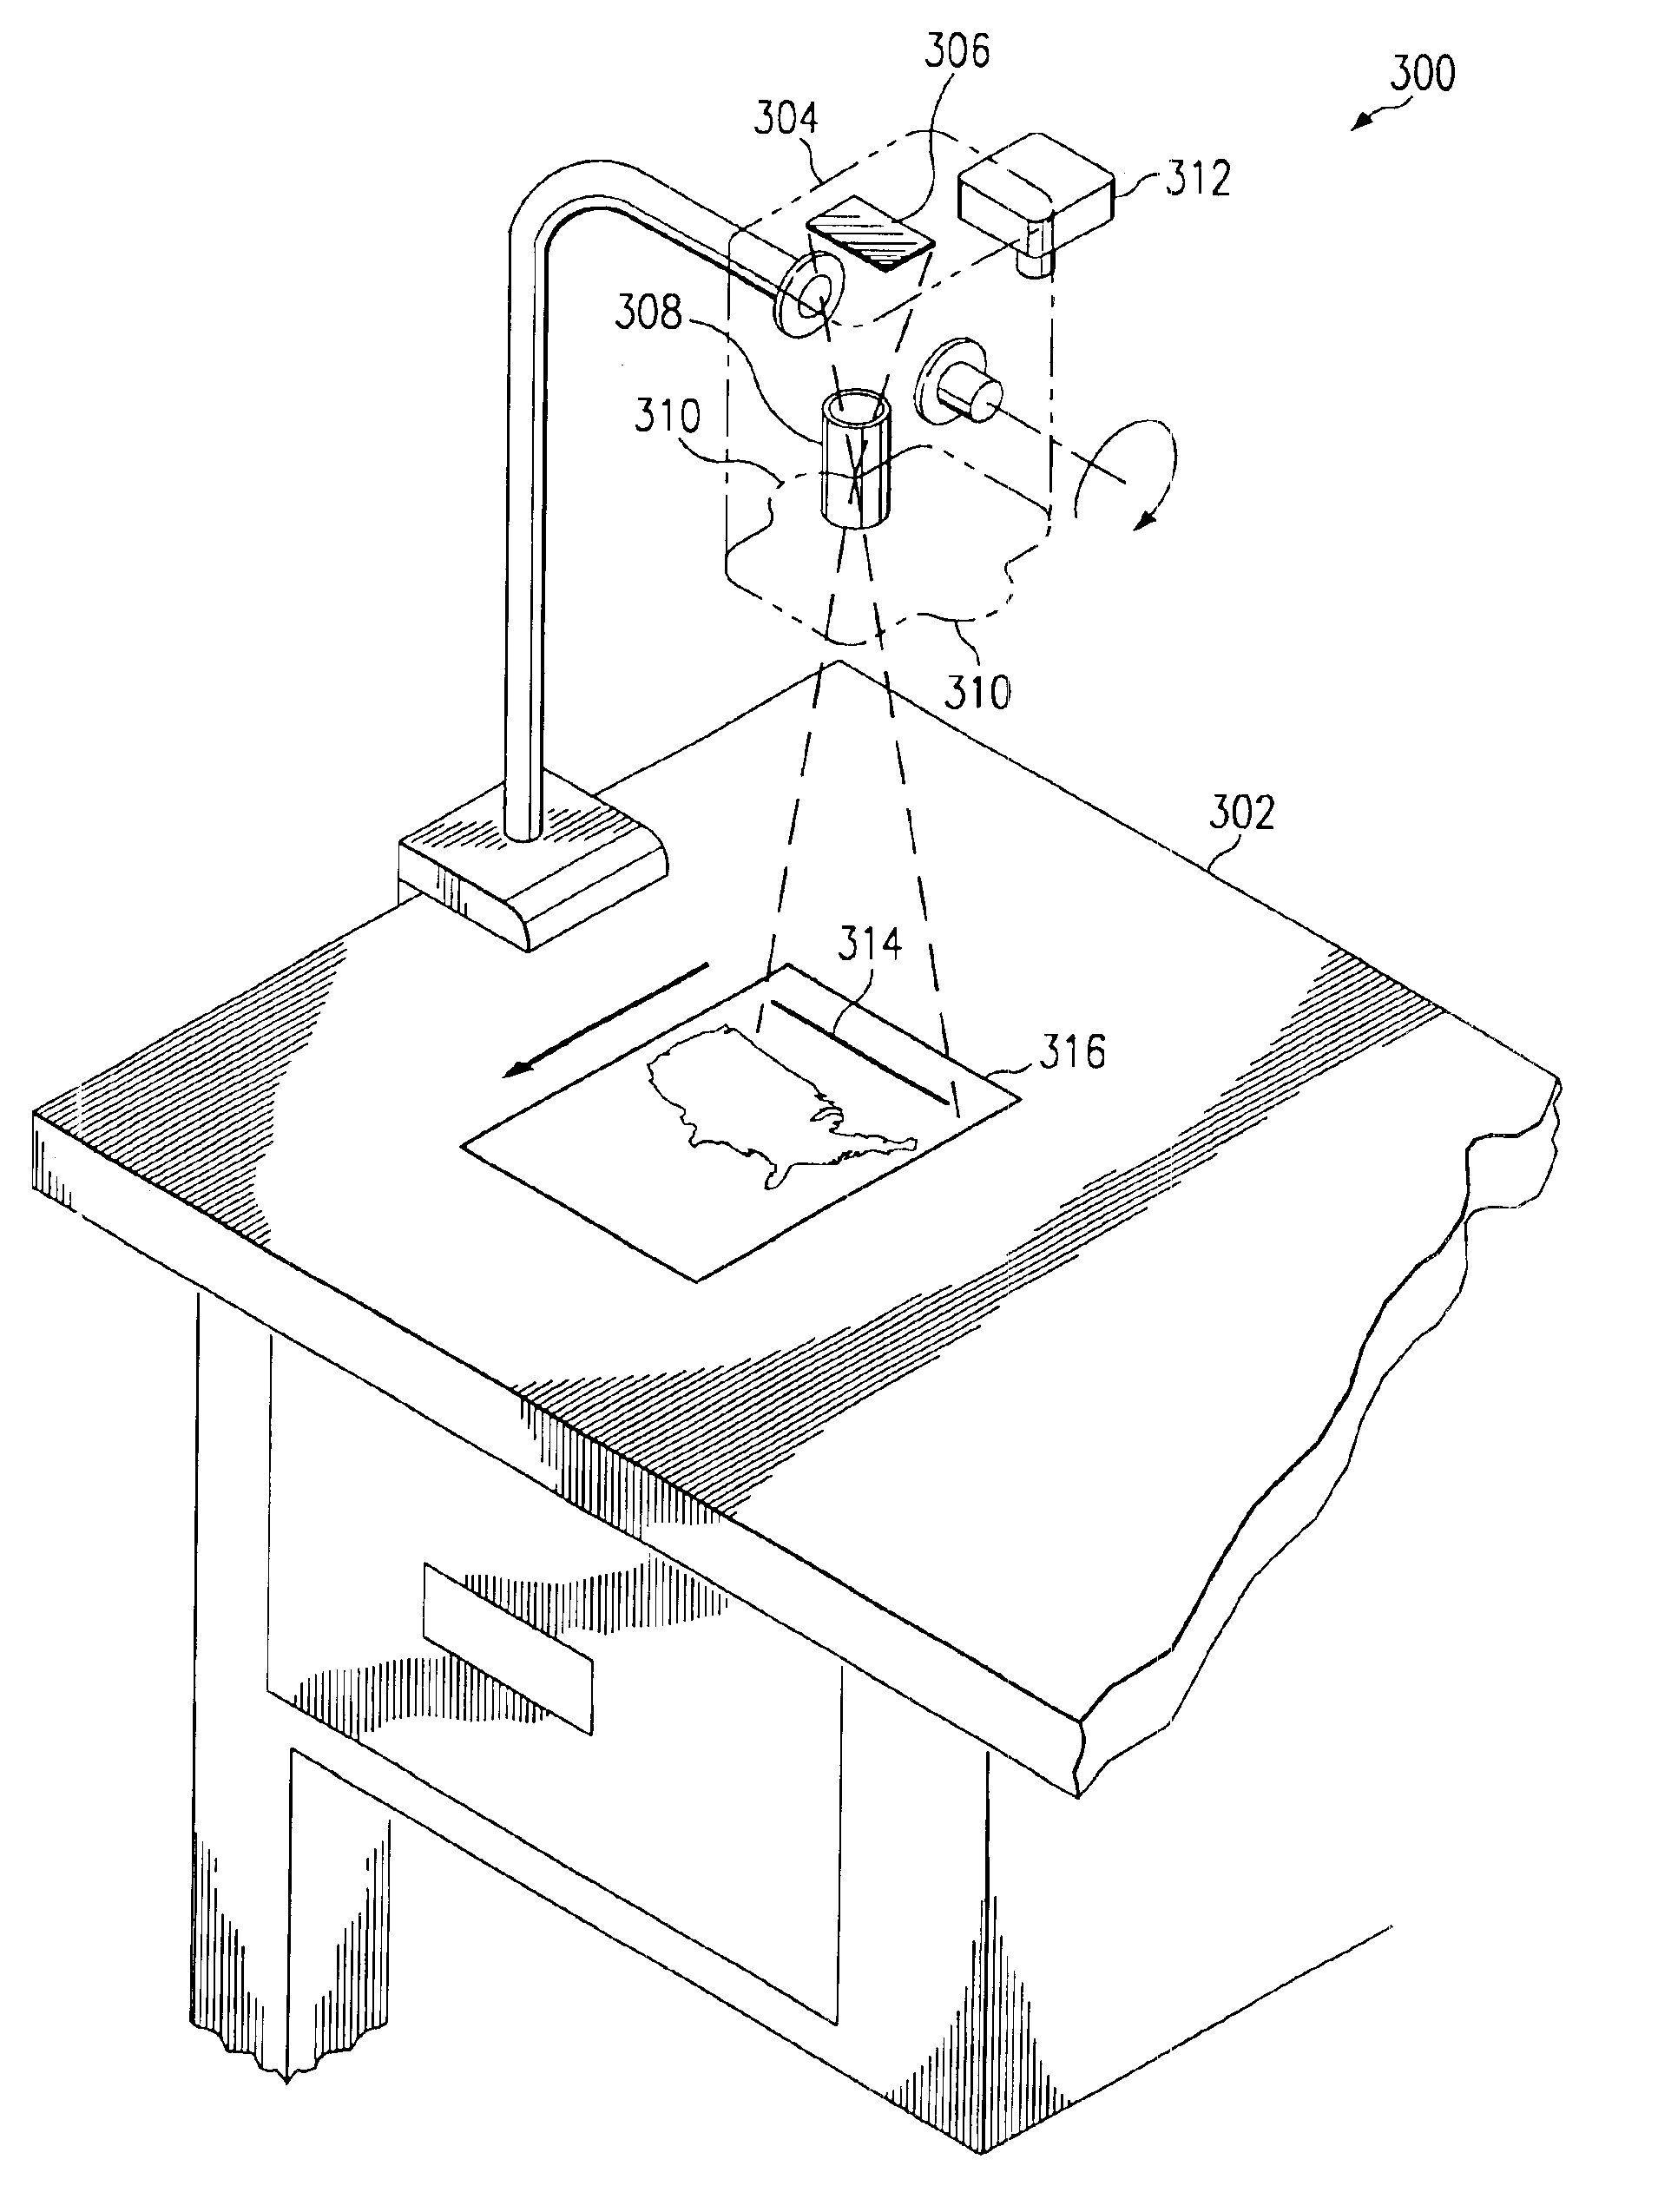 Method and system for scanning an image using a look-down linear array scanner